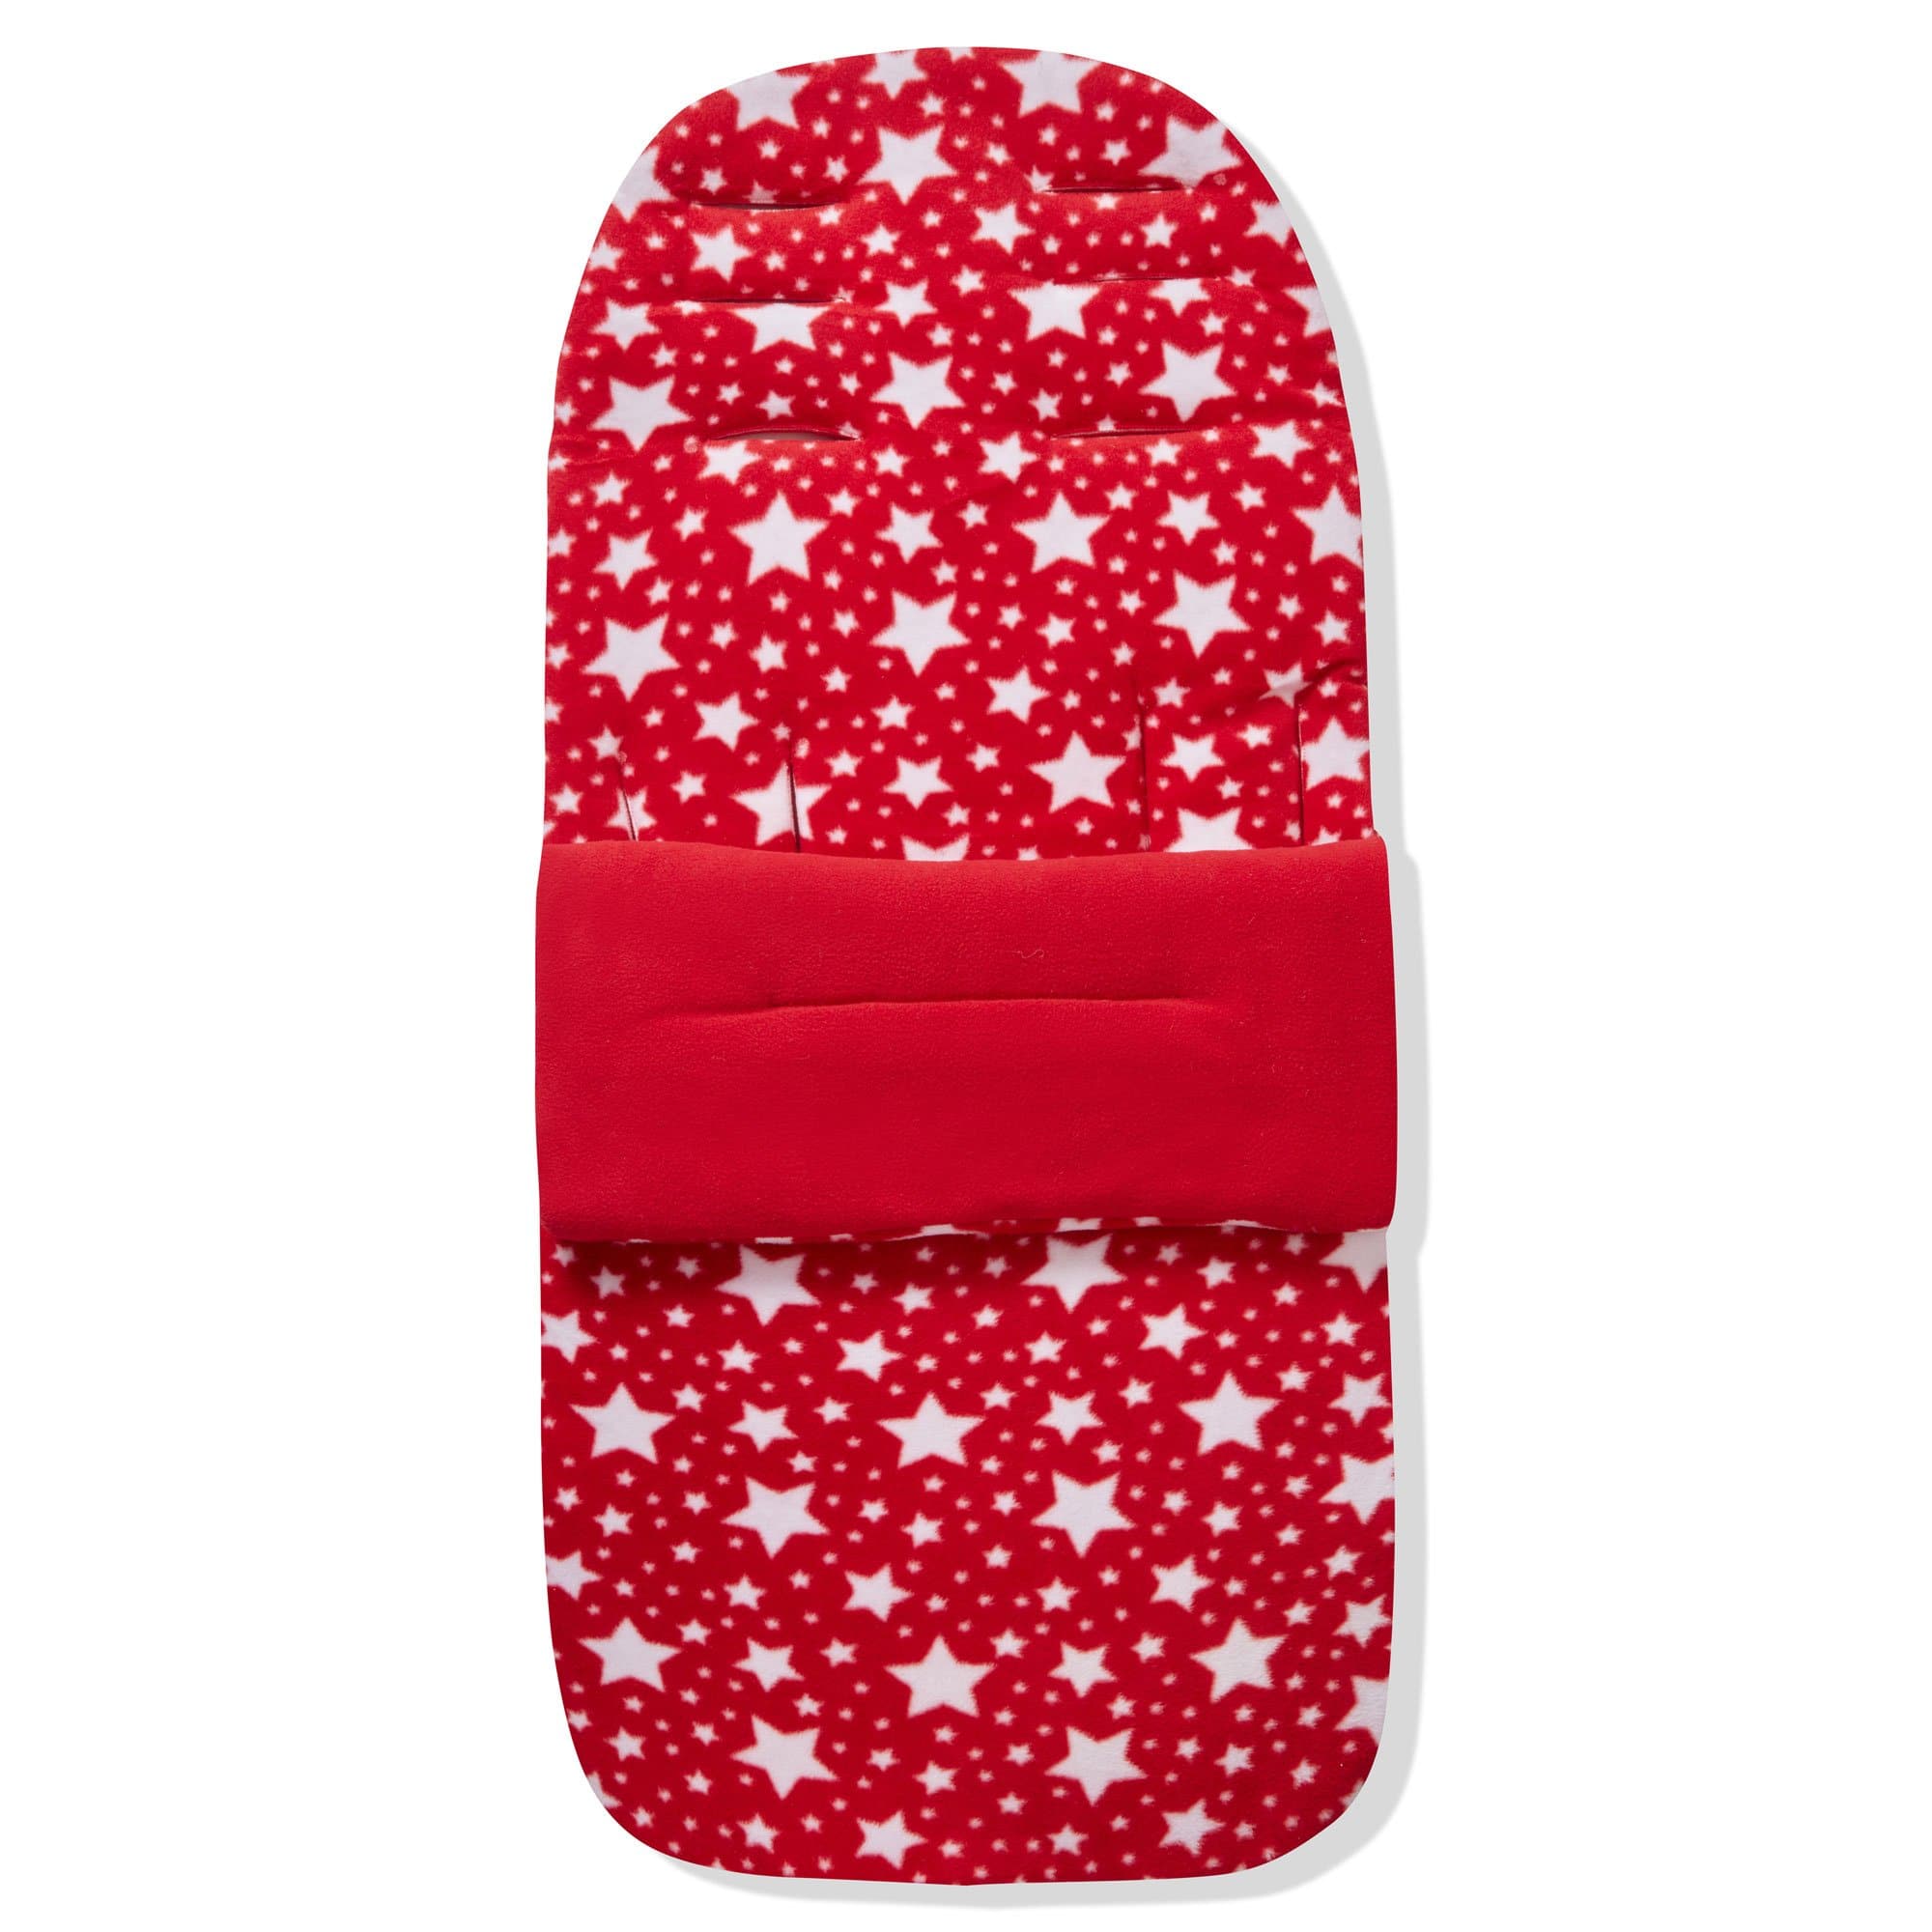 Fleece Footmuff / Cosy Toes Compatible with Out 'n' About - For Your Little One